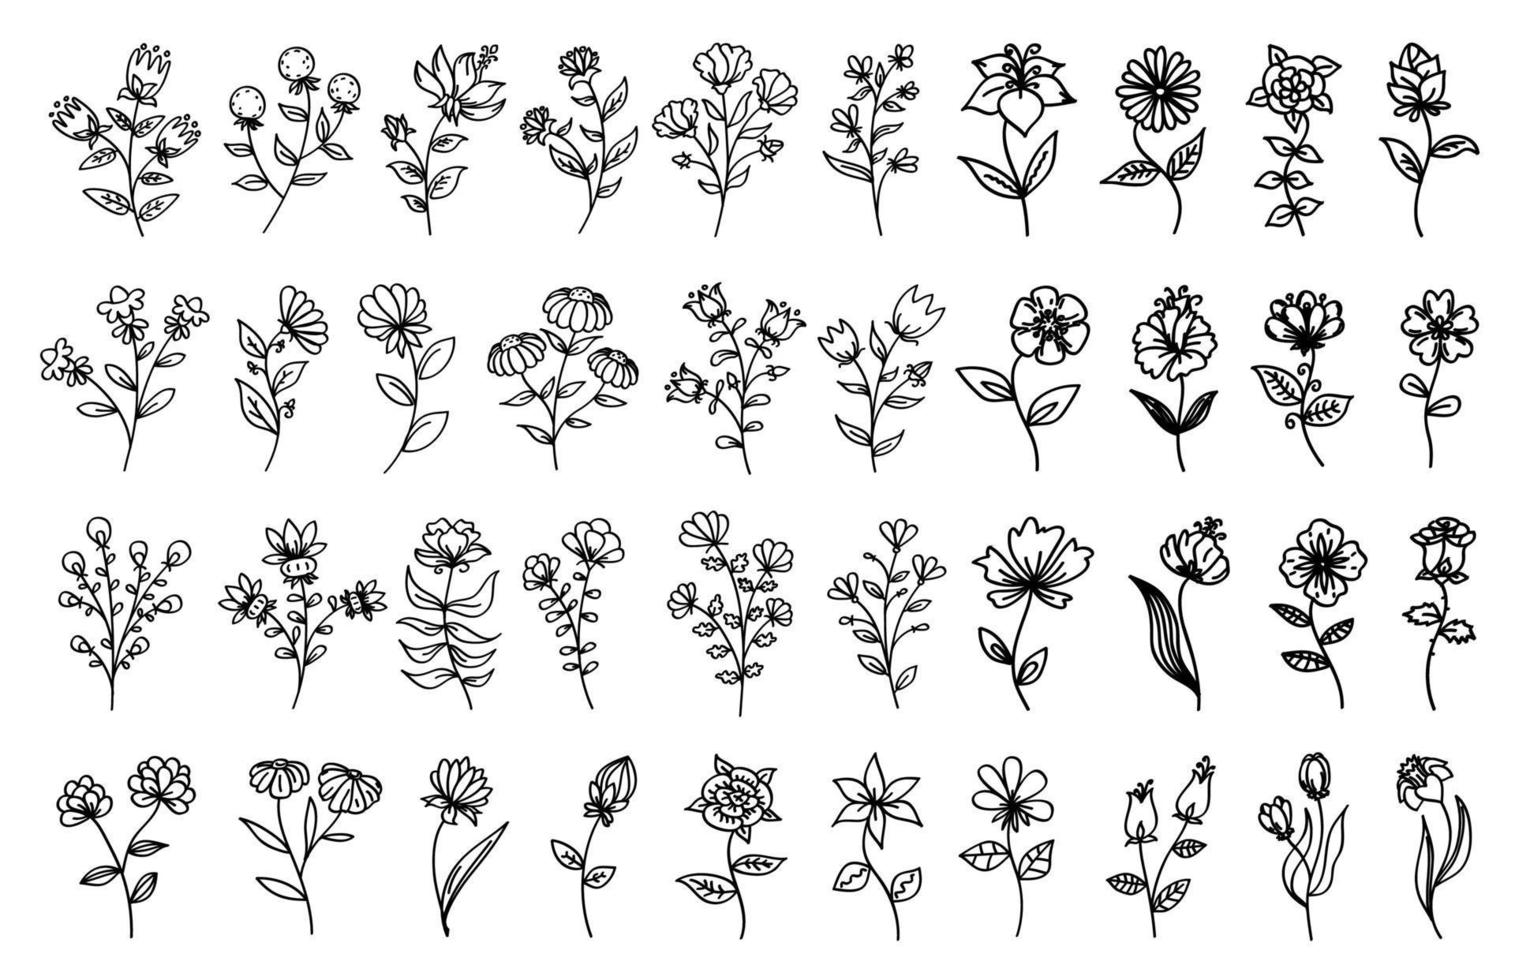 Outline floral set. Black thin line flowers isolated on white background. Flowers collection black outline illustrations. vector